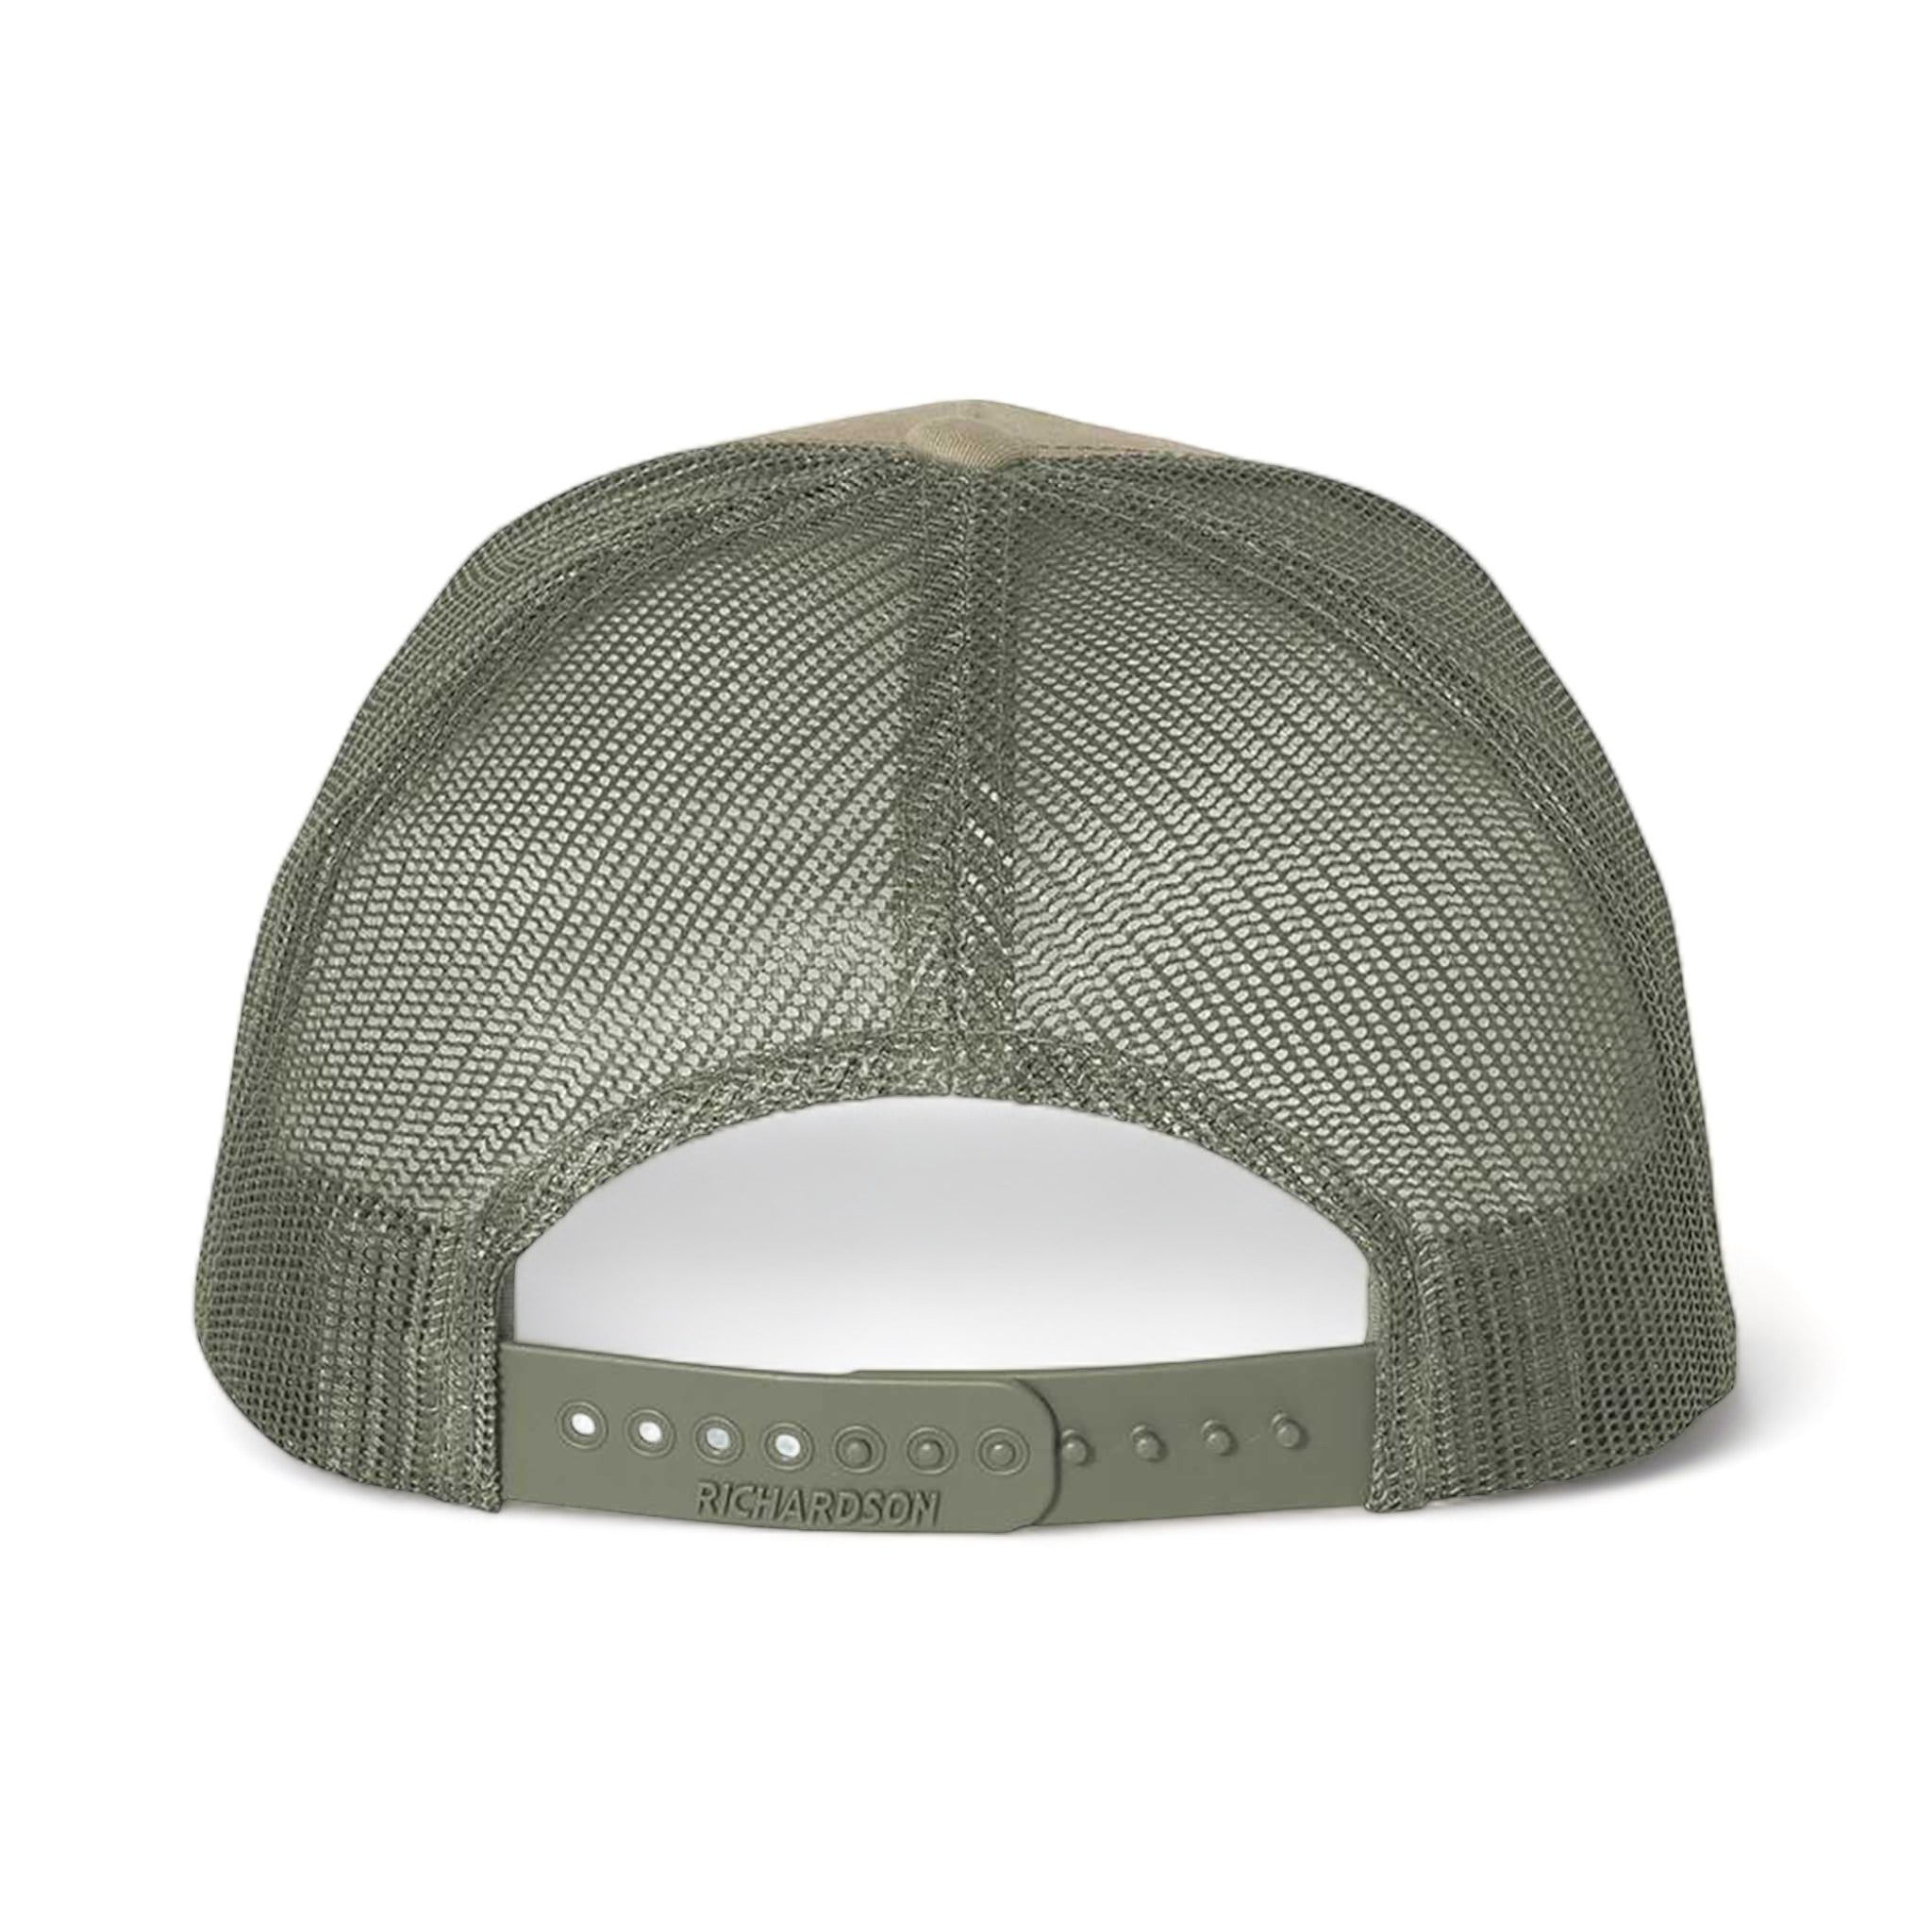 Back view of Richardson 112FP custom hat in pale khaki and loden green